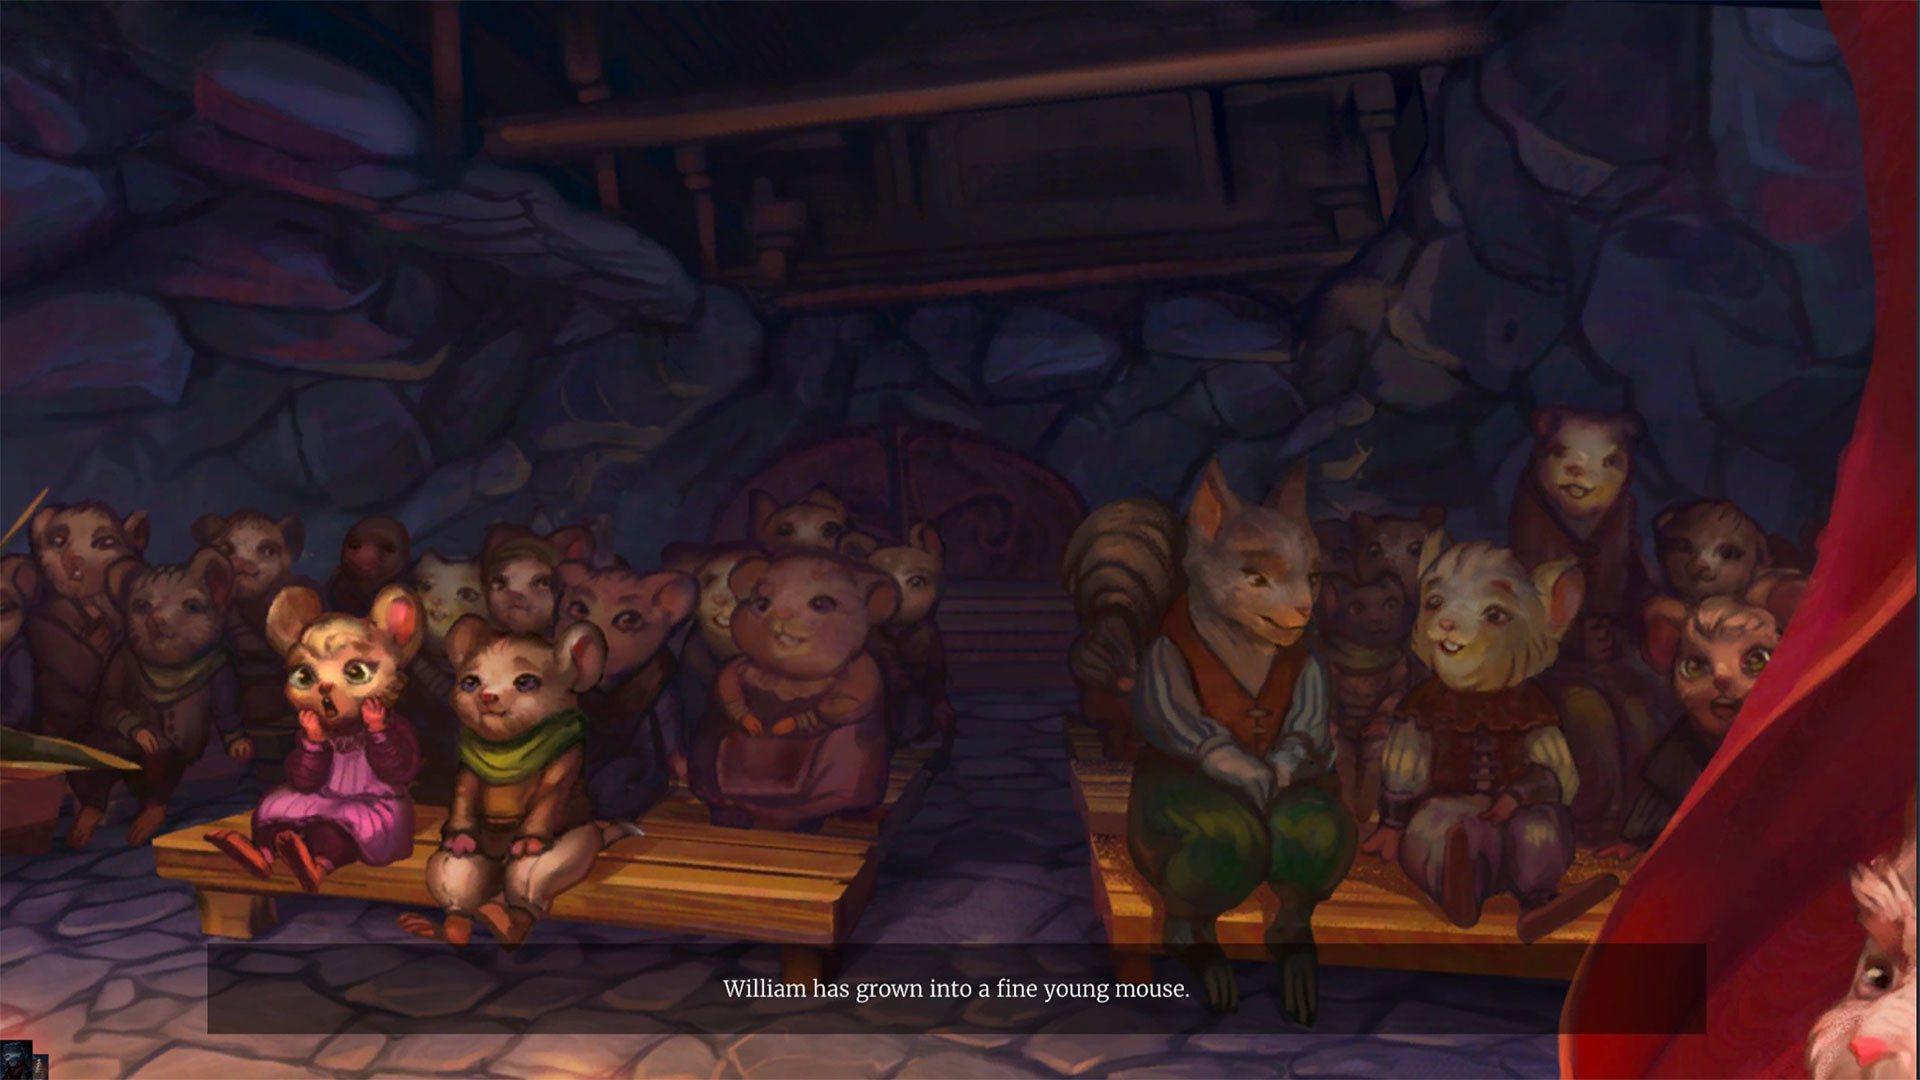 The Lost Legends of Redwall : The Scout Act 3 screenshot